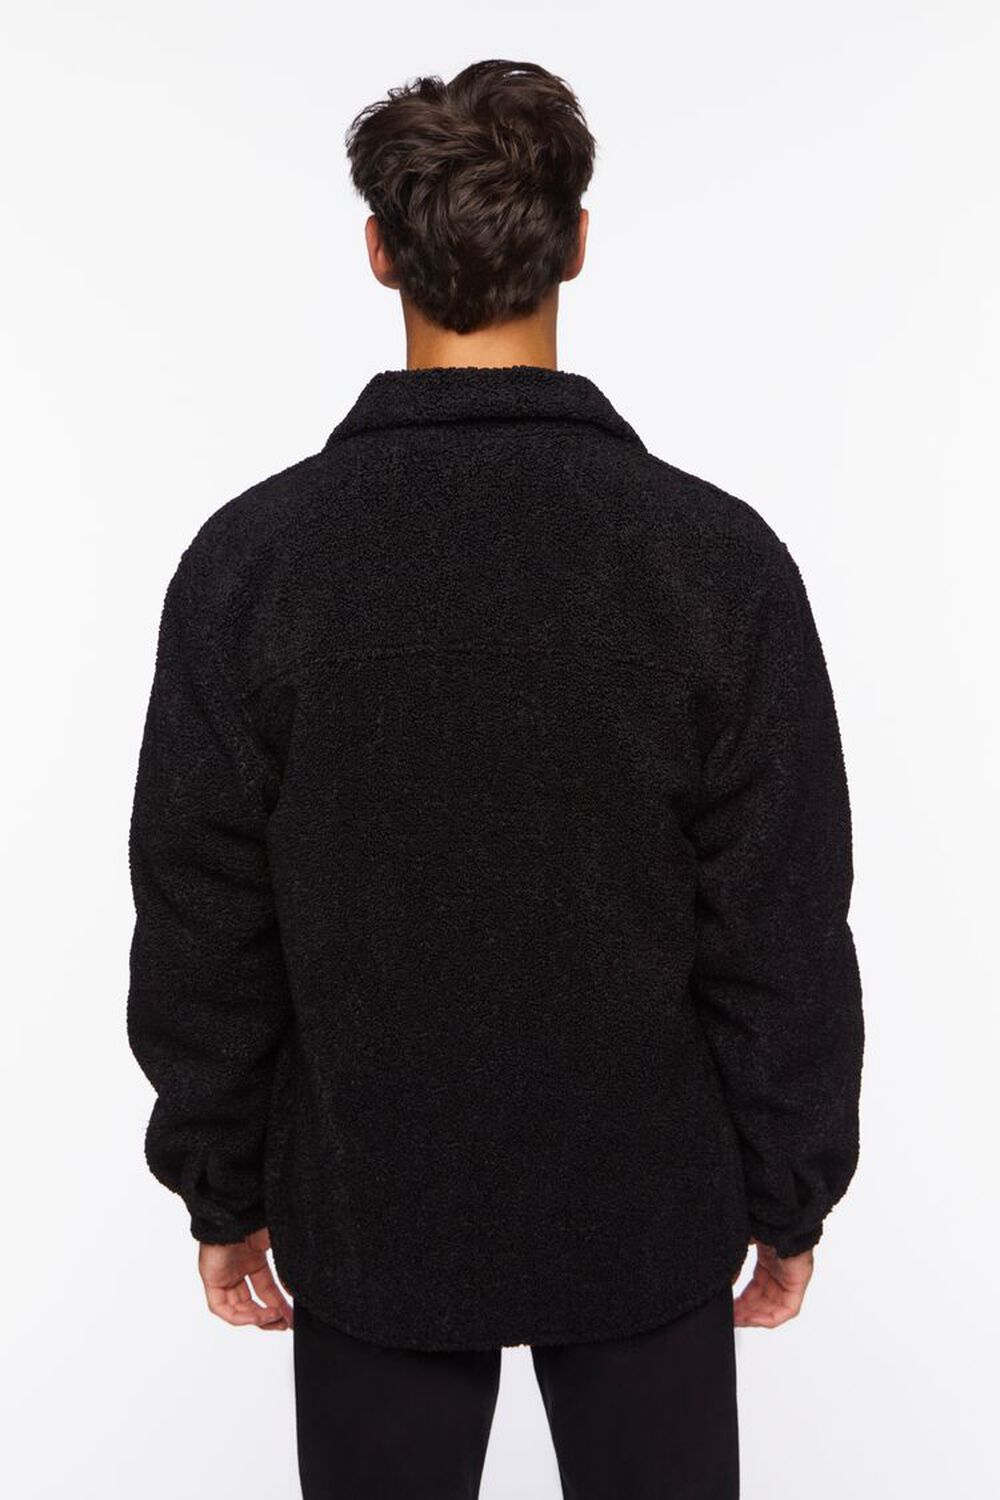 BLACK Faux Shearling Button-Up Jacket, image 3